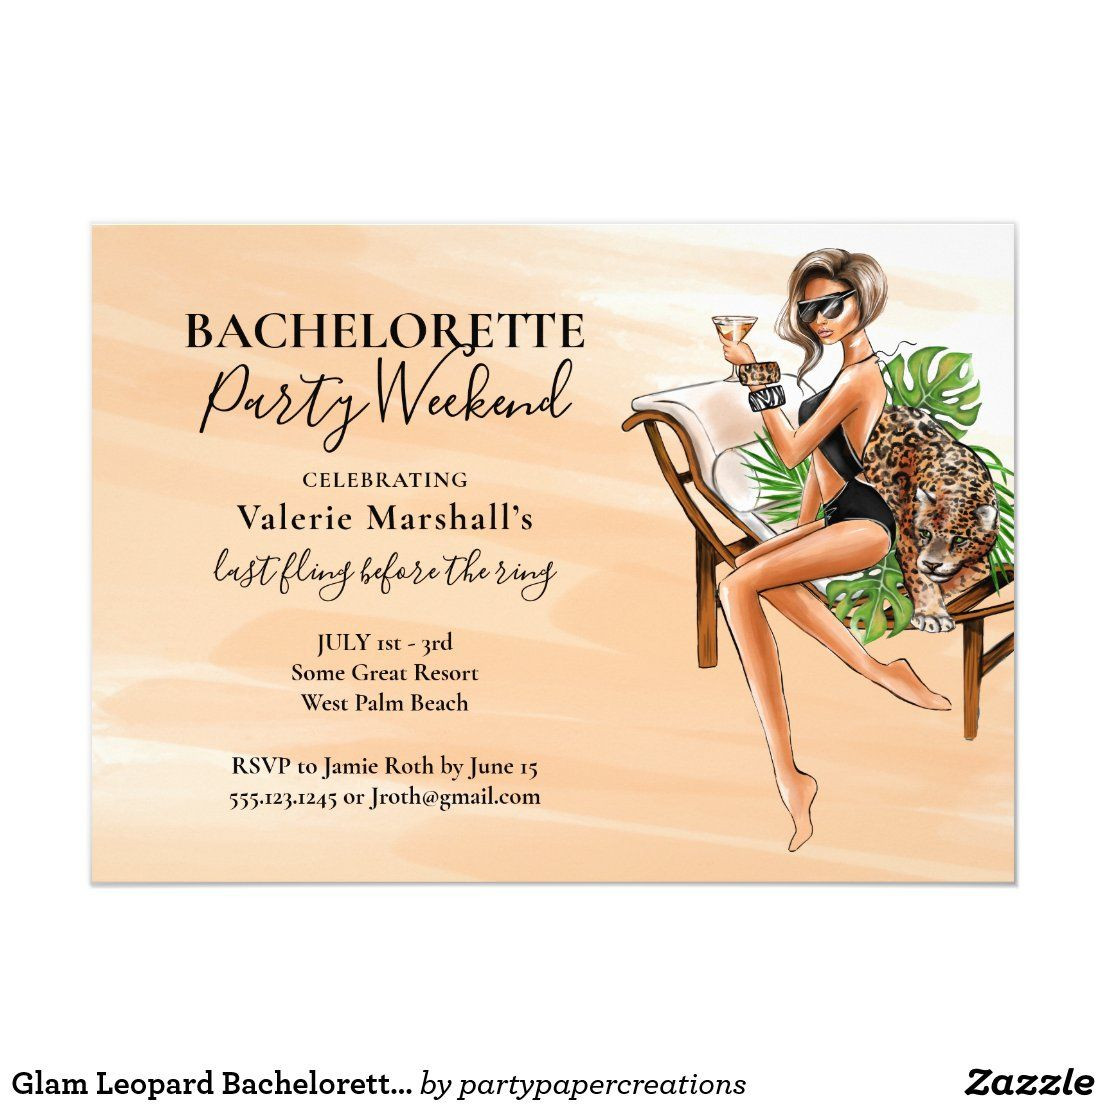 West Palm Beach Bachelorette Party Ideas
 Pin on Wedding Invitations Favors and more 